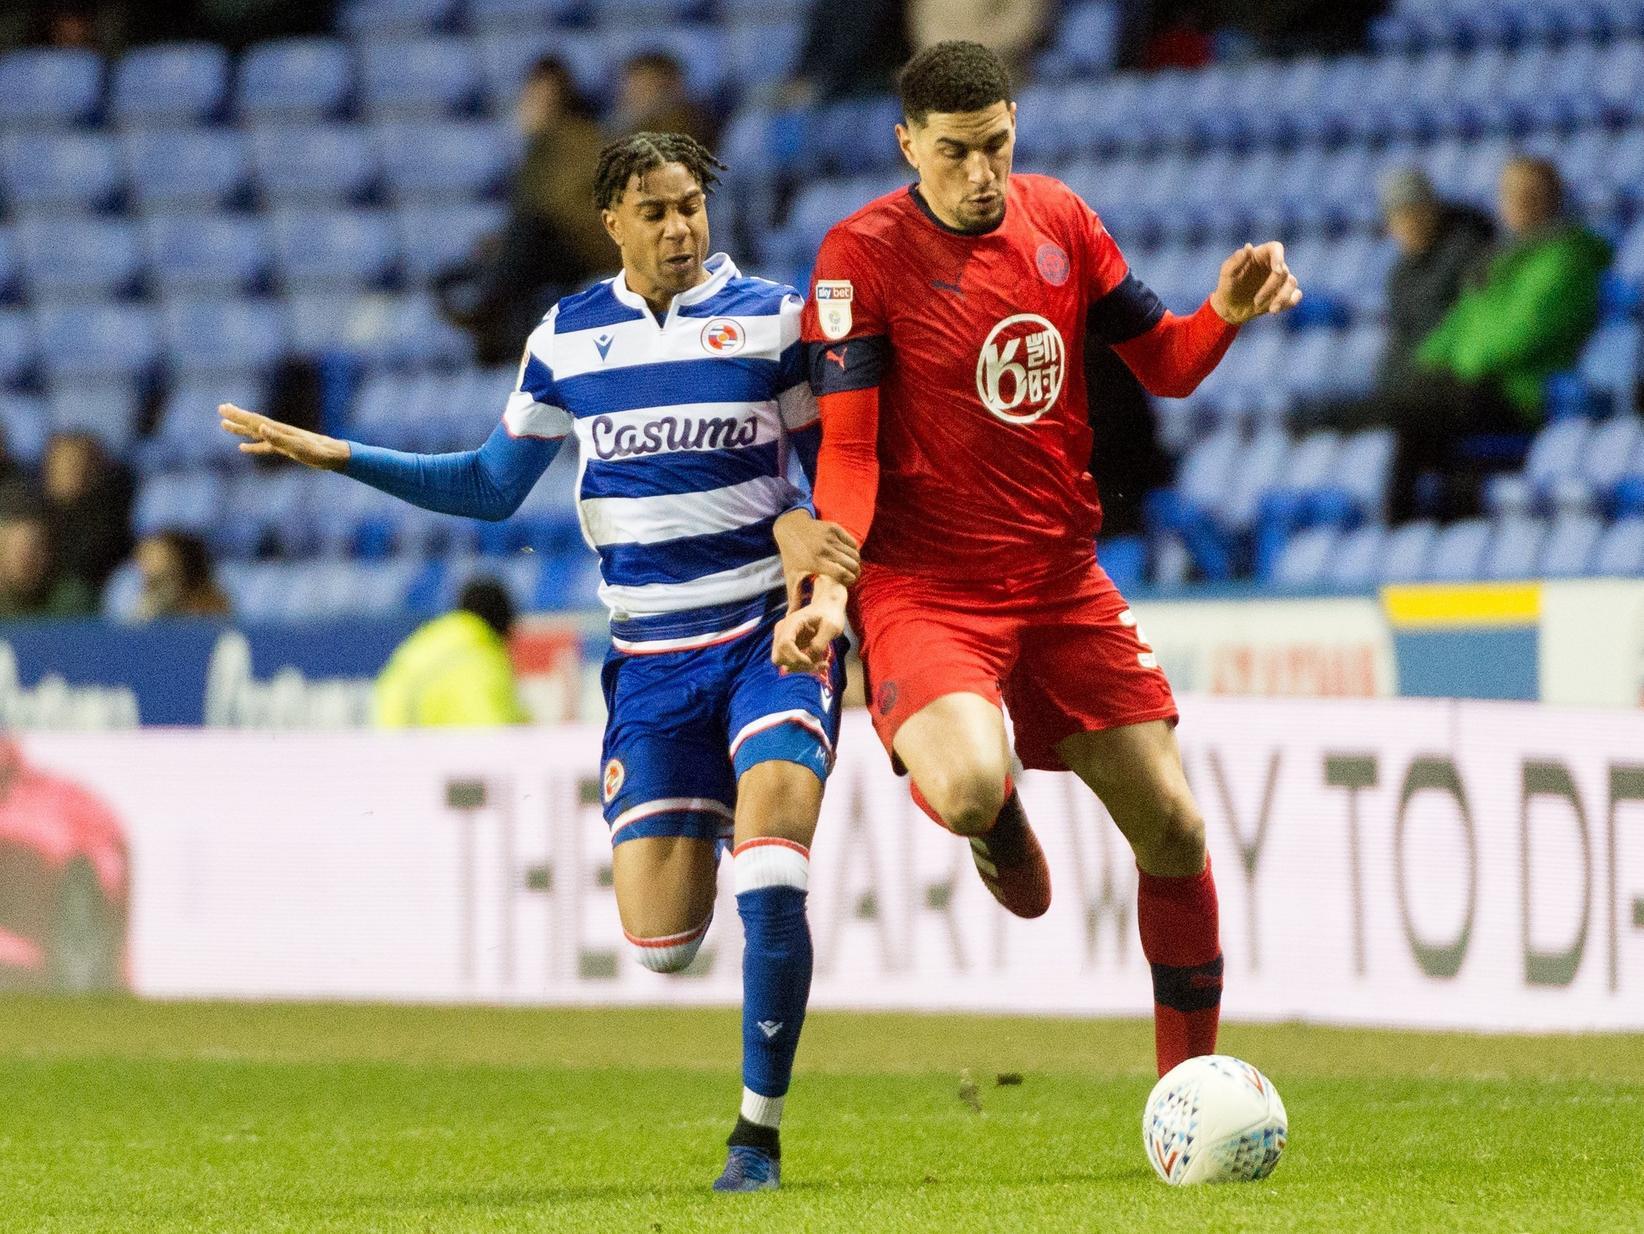 Leon Balogun: 8 - Has slotted into the side seamlessly and now impossible to imagine the backline without him